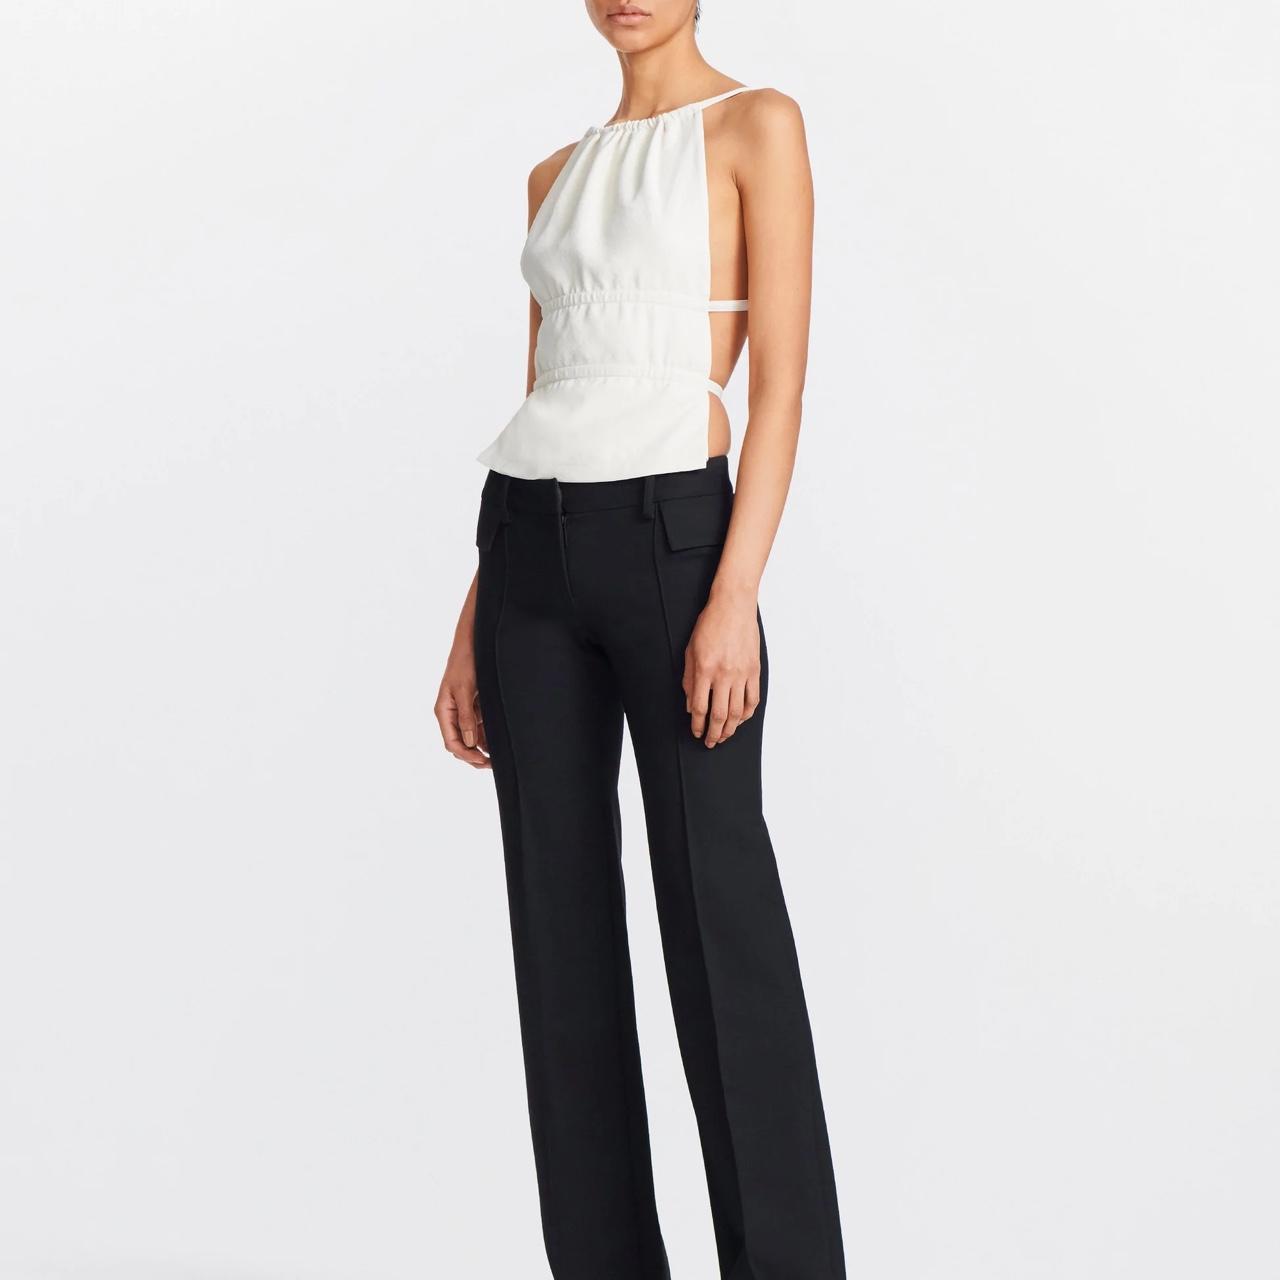 Dion Lee Women's White and Cream Top